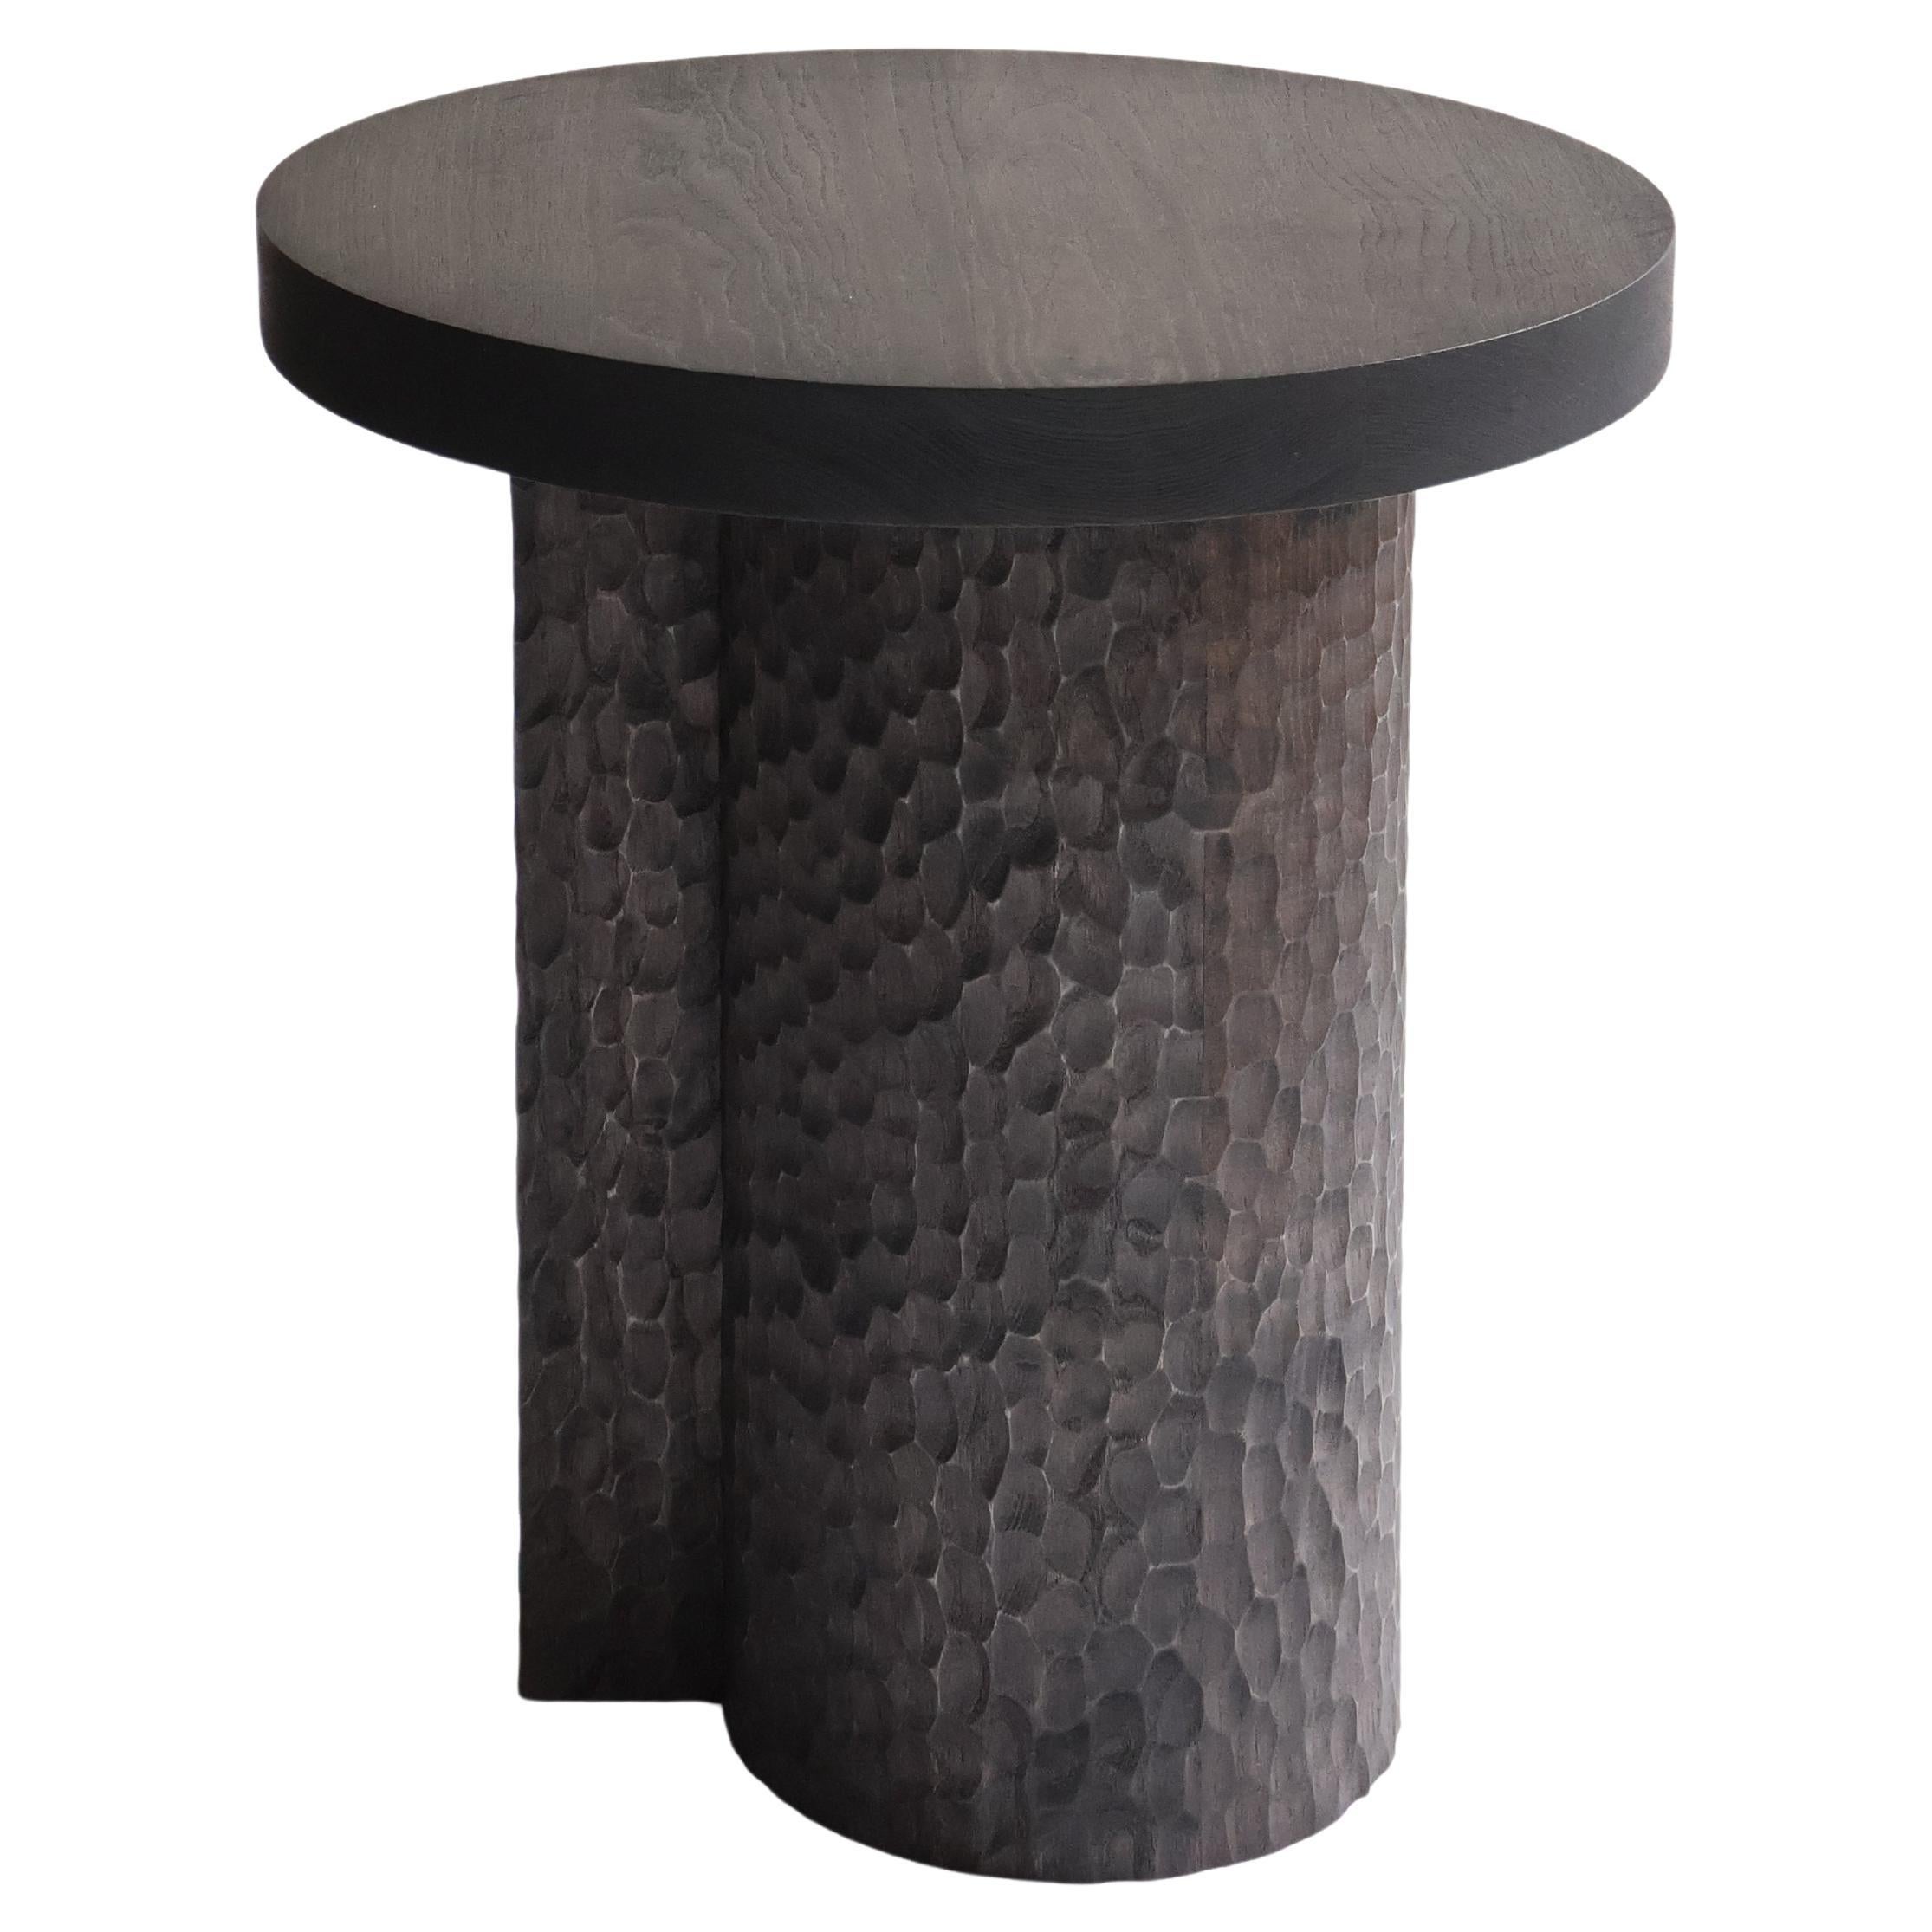 Origin Made Artesao Side Table in Smoked Ash For Sale